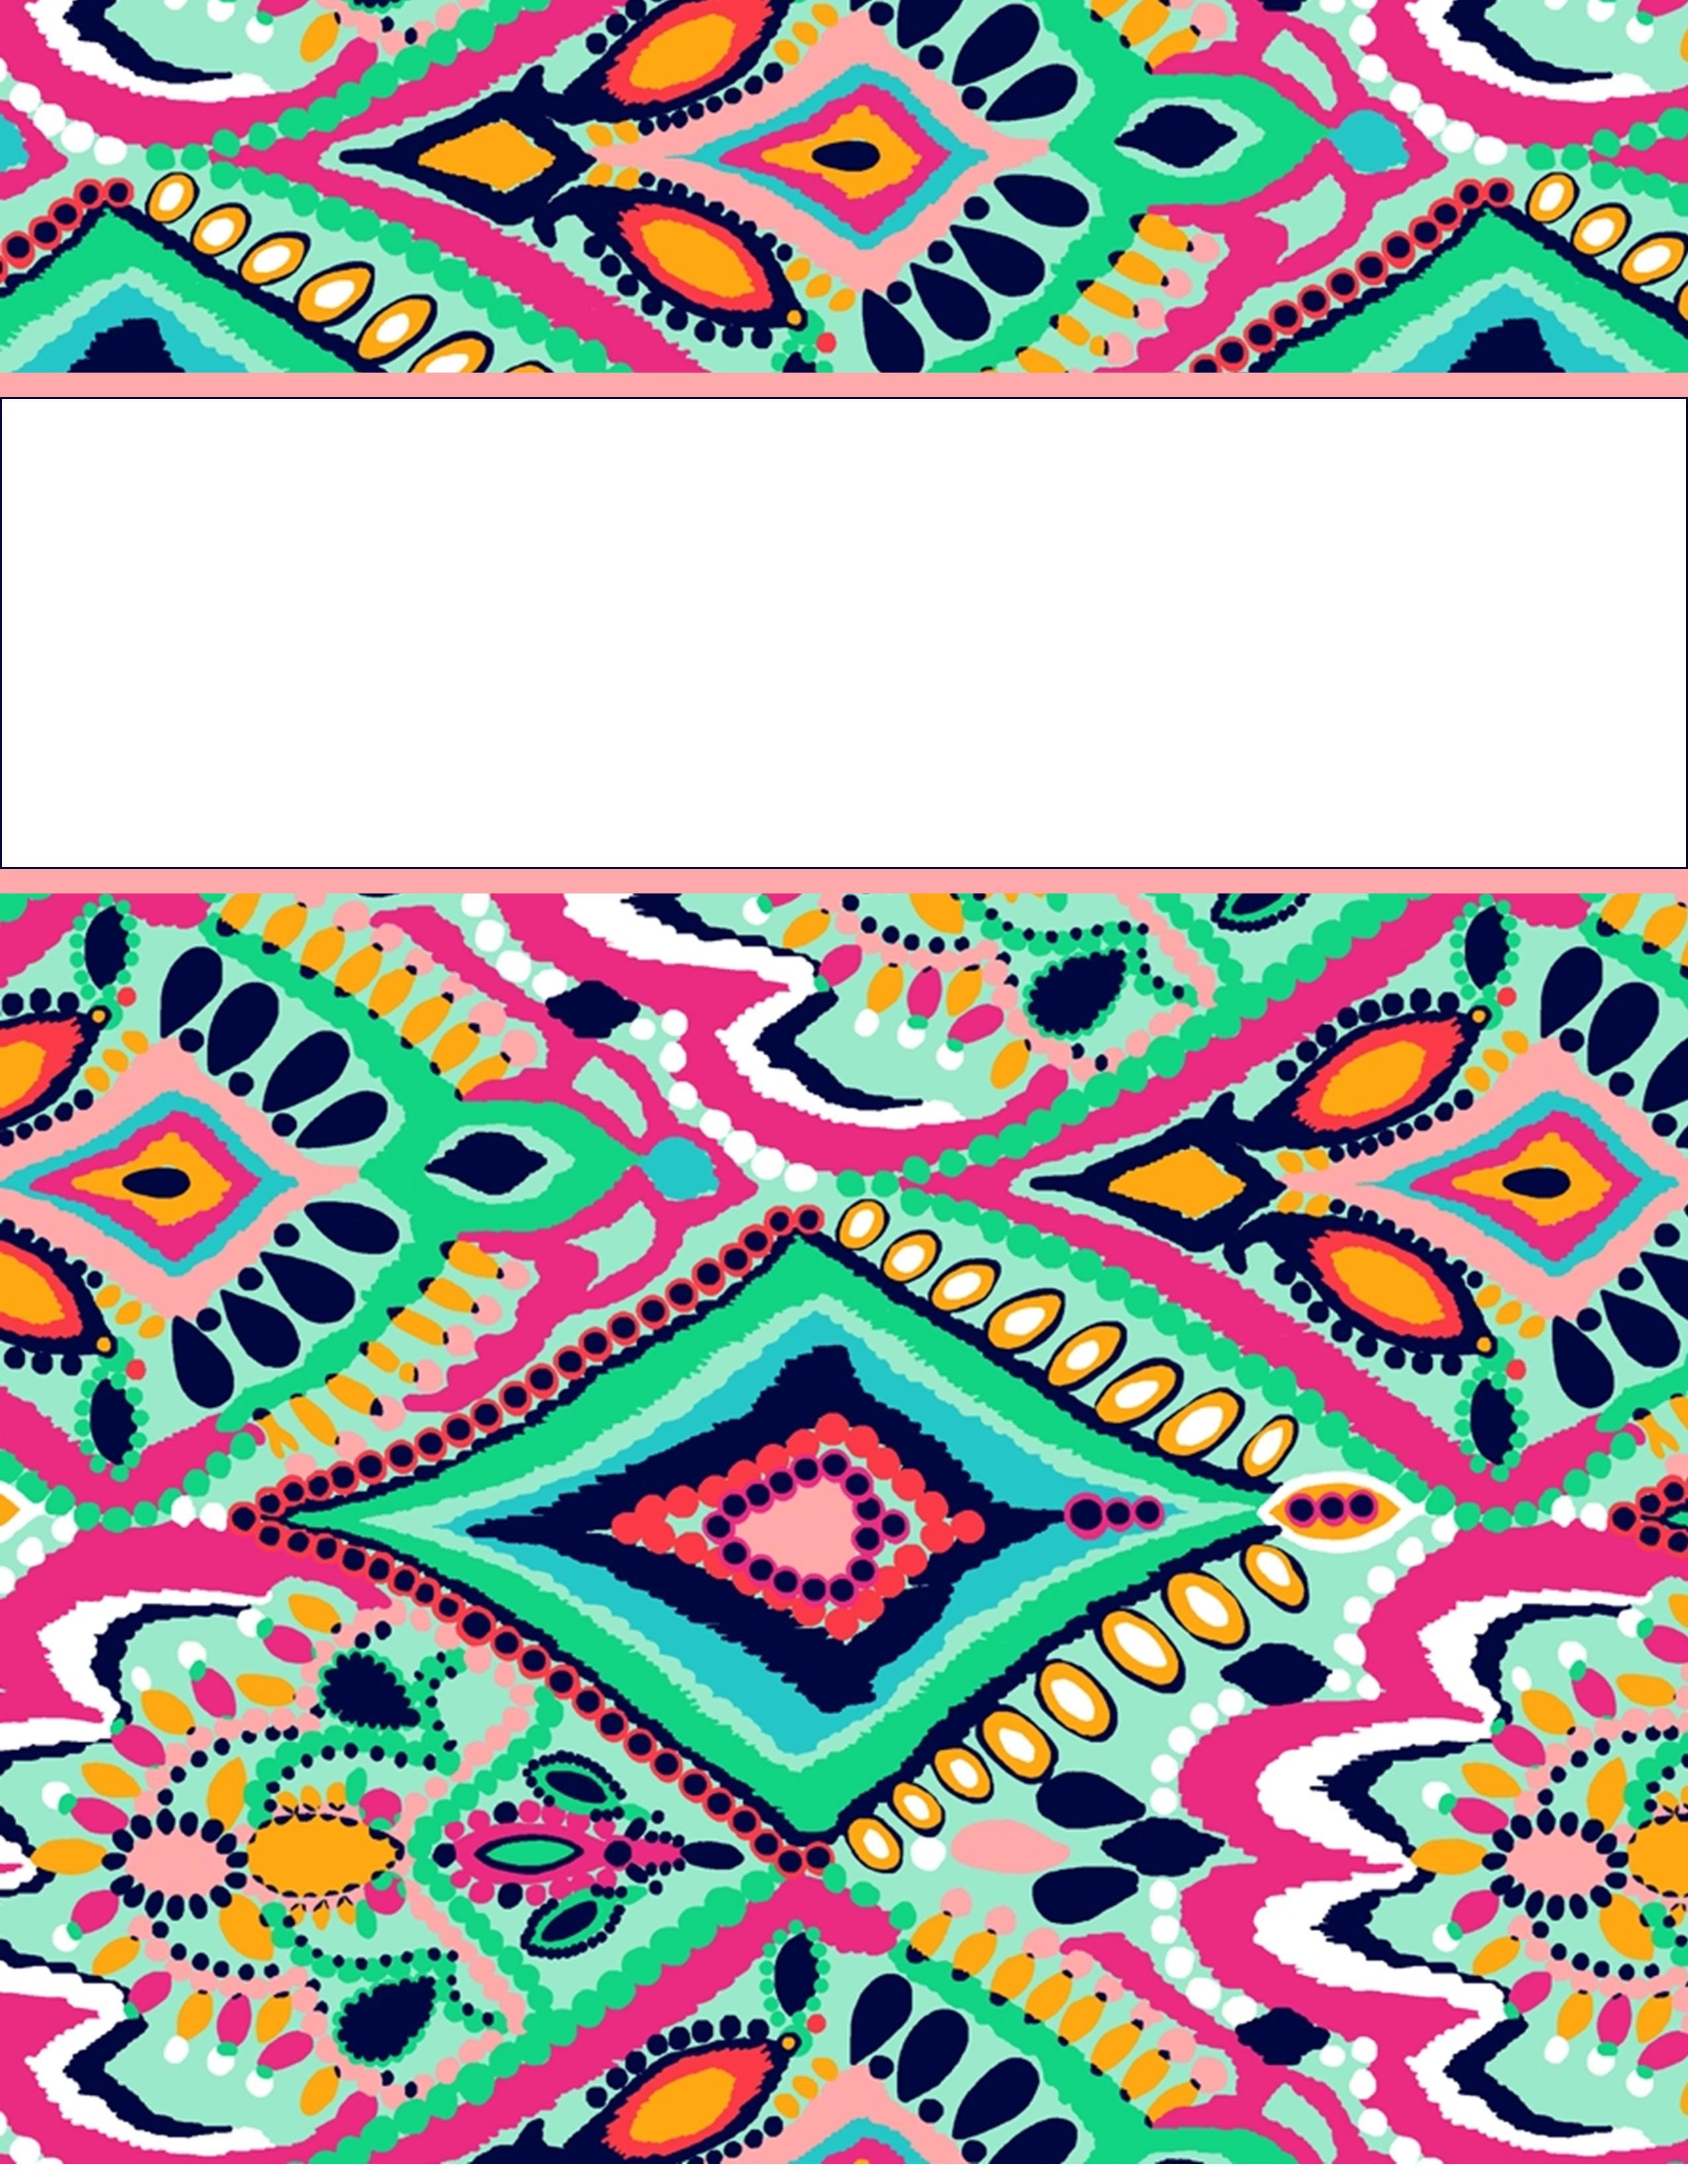 Binder Cover Templates Free My Cute Binder Covers